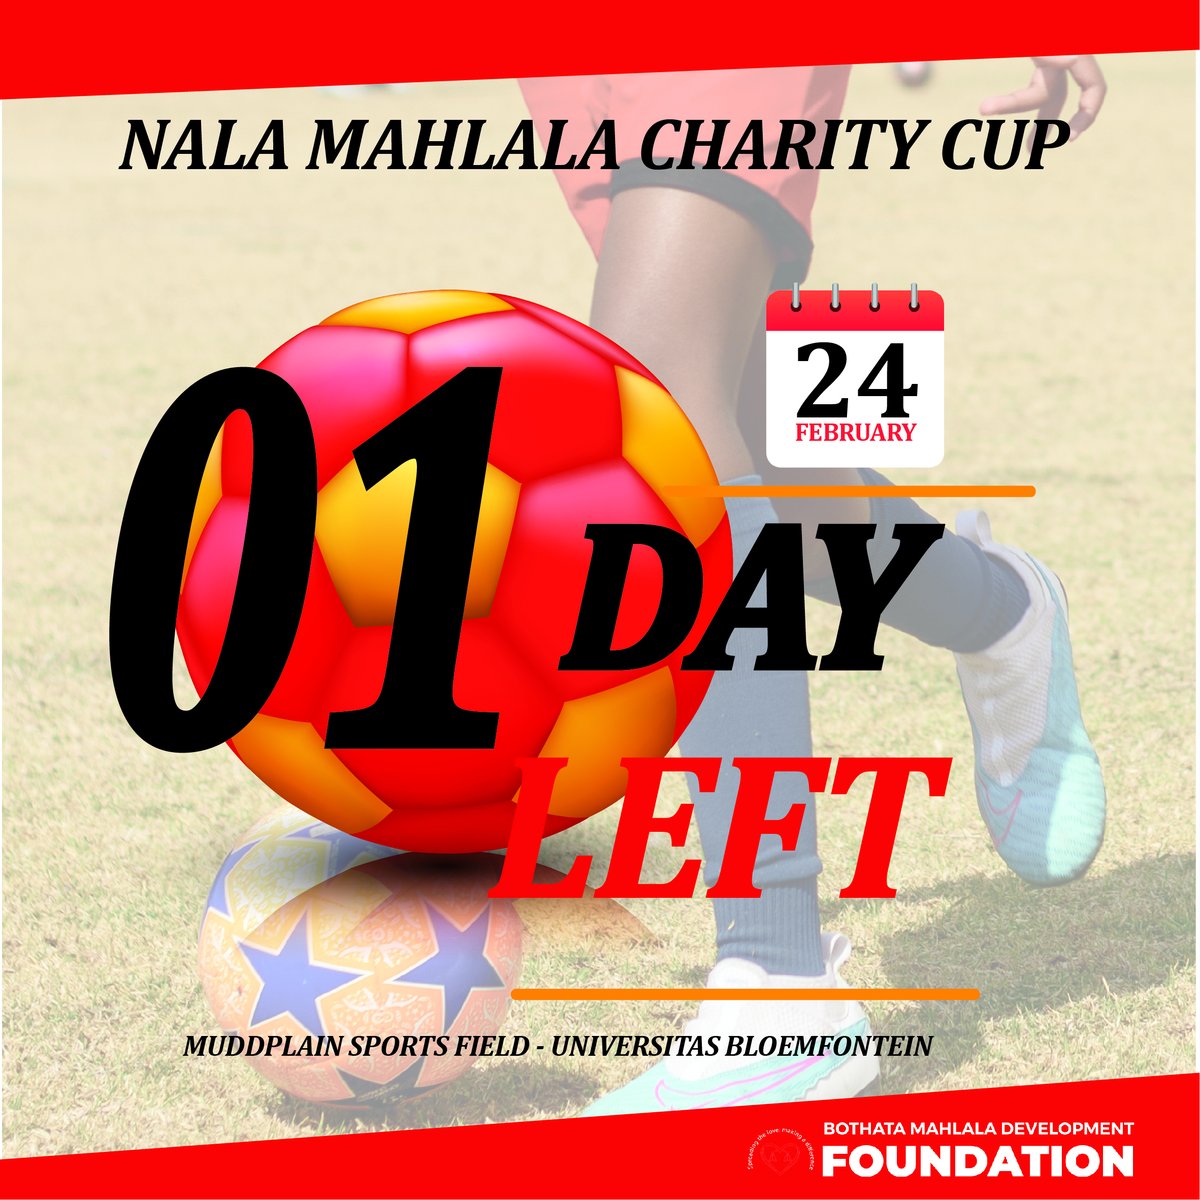 Countdown to kickoff: The eve of the Nala Mahlala charity soccer cup tournament
 ⚽️📷 #CharityCupCountdown #sevenaside #Nalacharitycup #bmdfoundation #footballculture #supportcharities #charityeventent2024